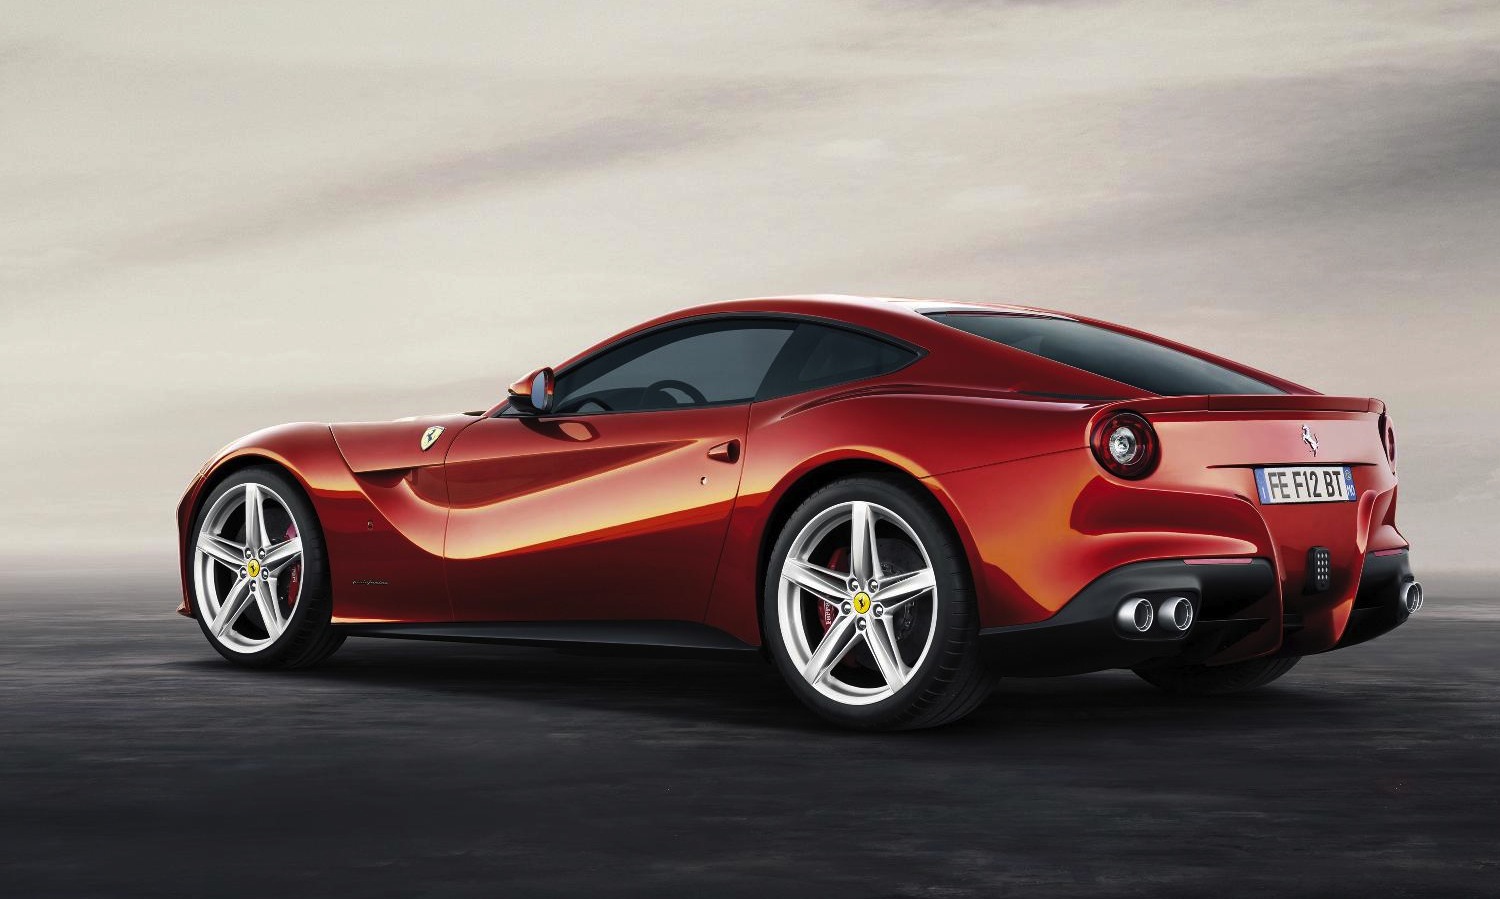 Special Ferrari F12 being made for US market 60th anniversary